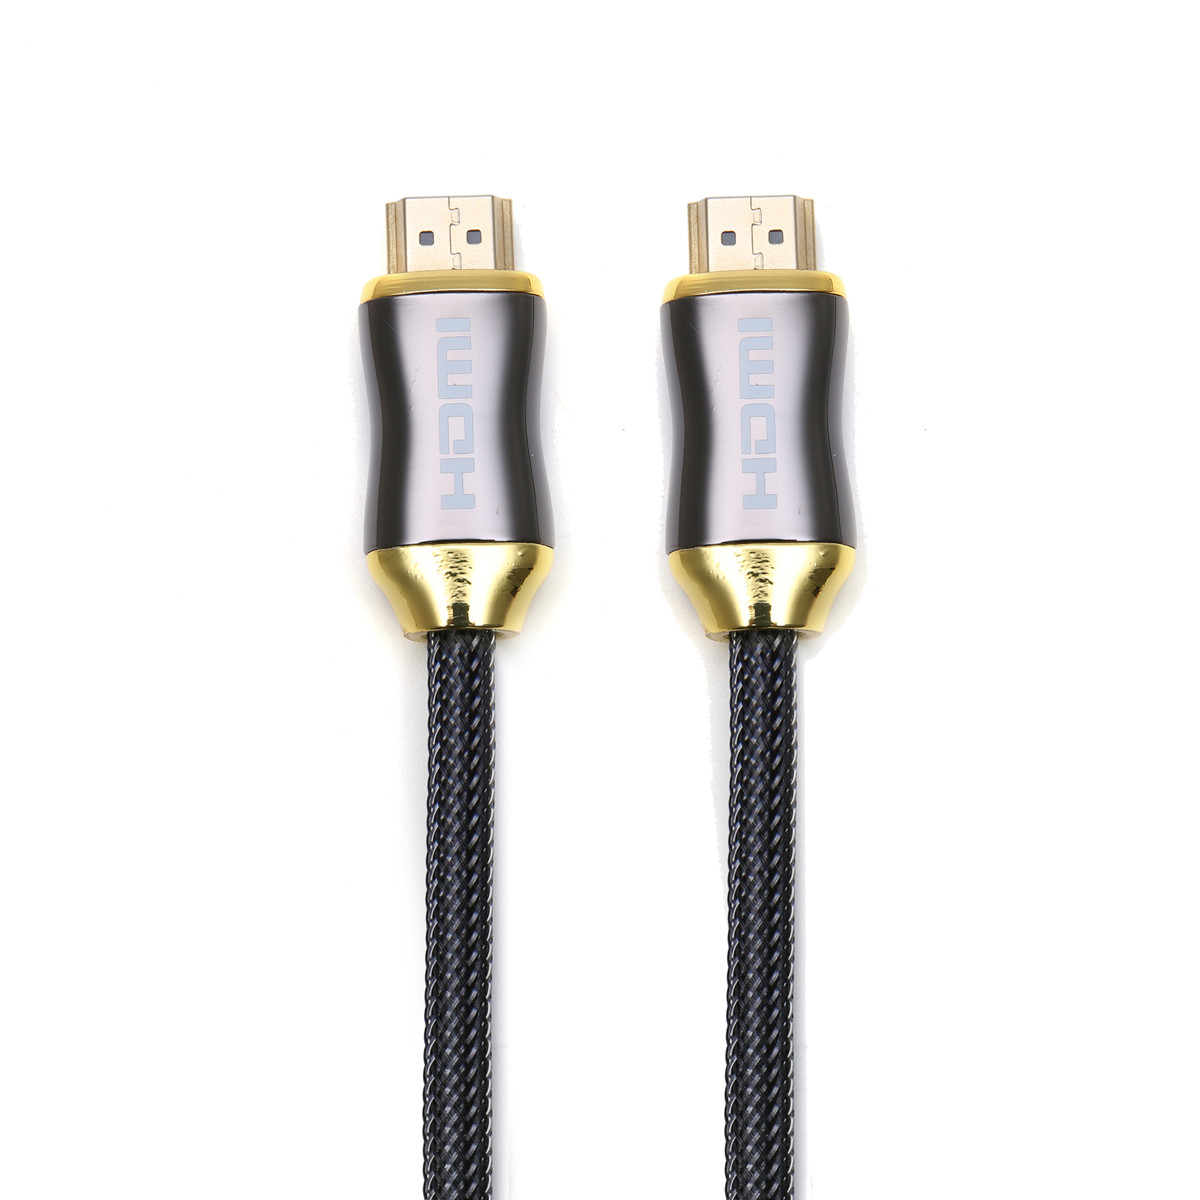 Find 4K HDMI Compatible 2 0 Cable 2160P High Resolution 4K Full Ultra HD Braided Nylon Video Cable for Sale on Gipsybee.com with cryptocurrencies